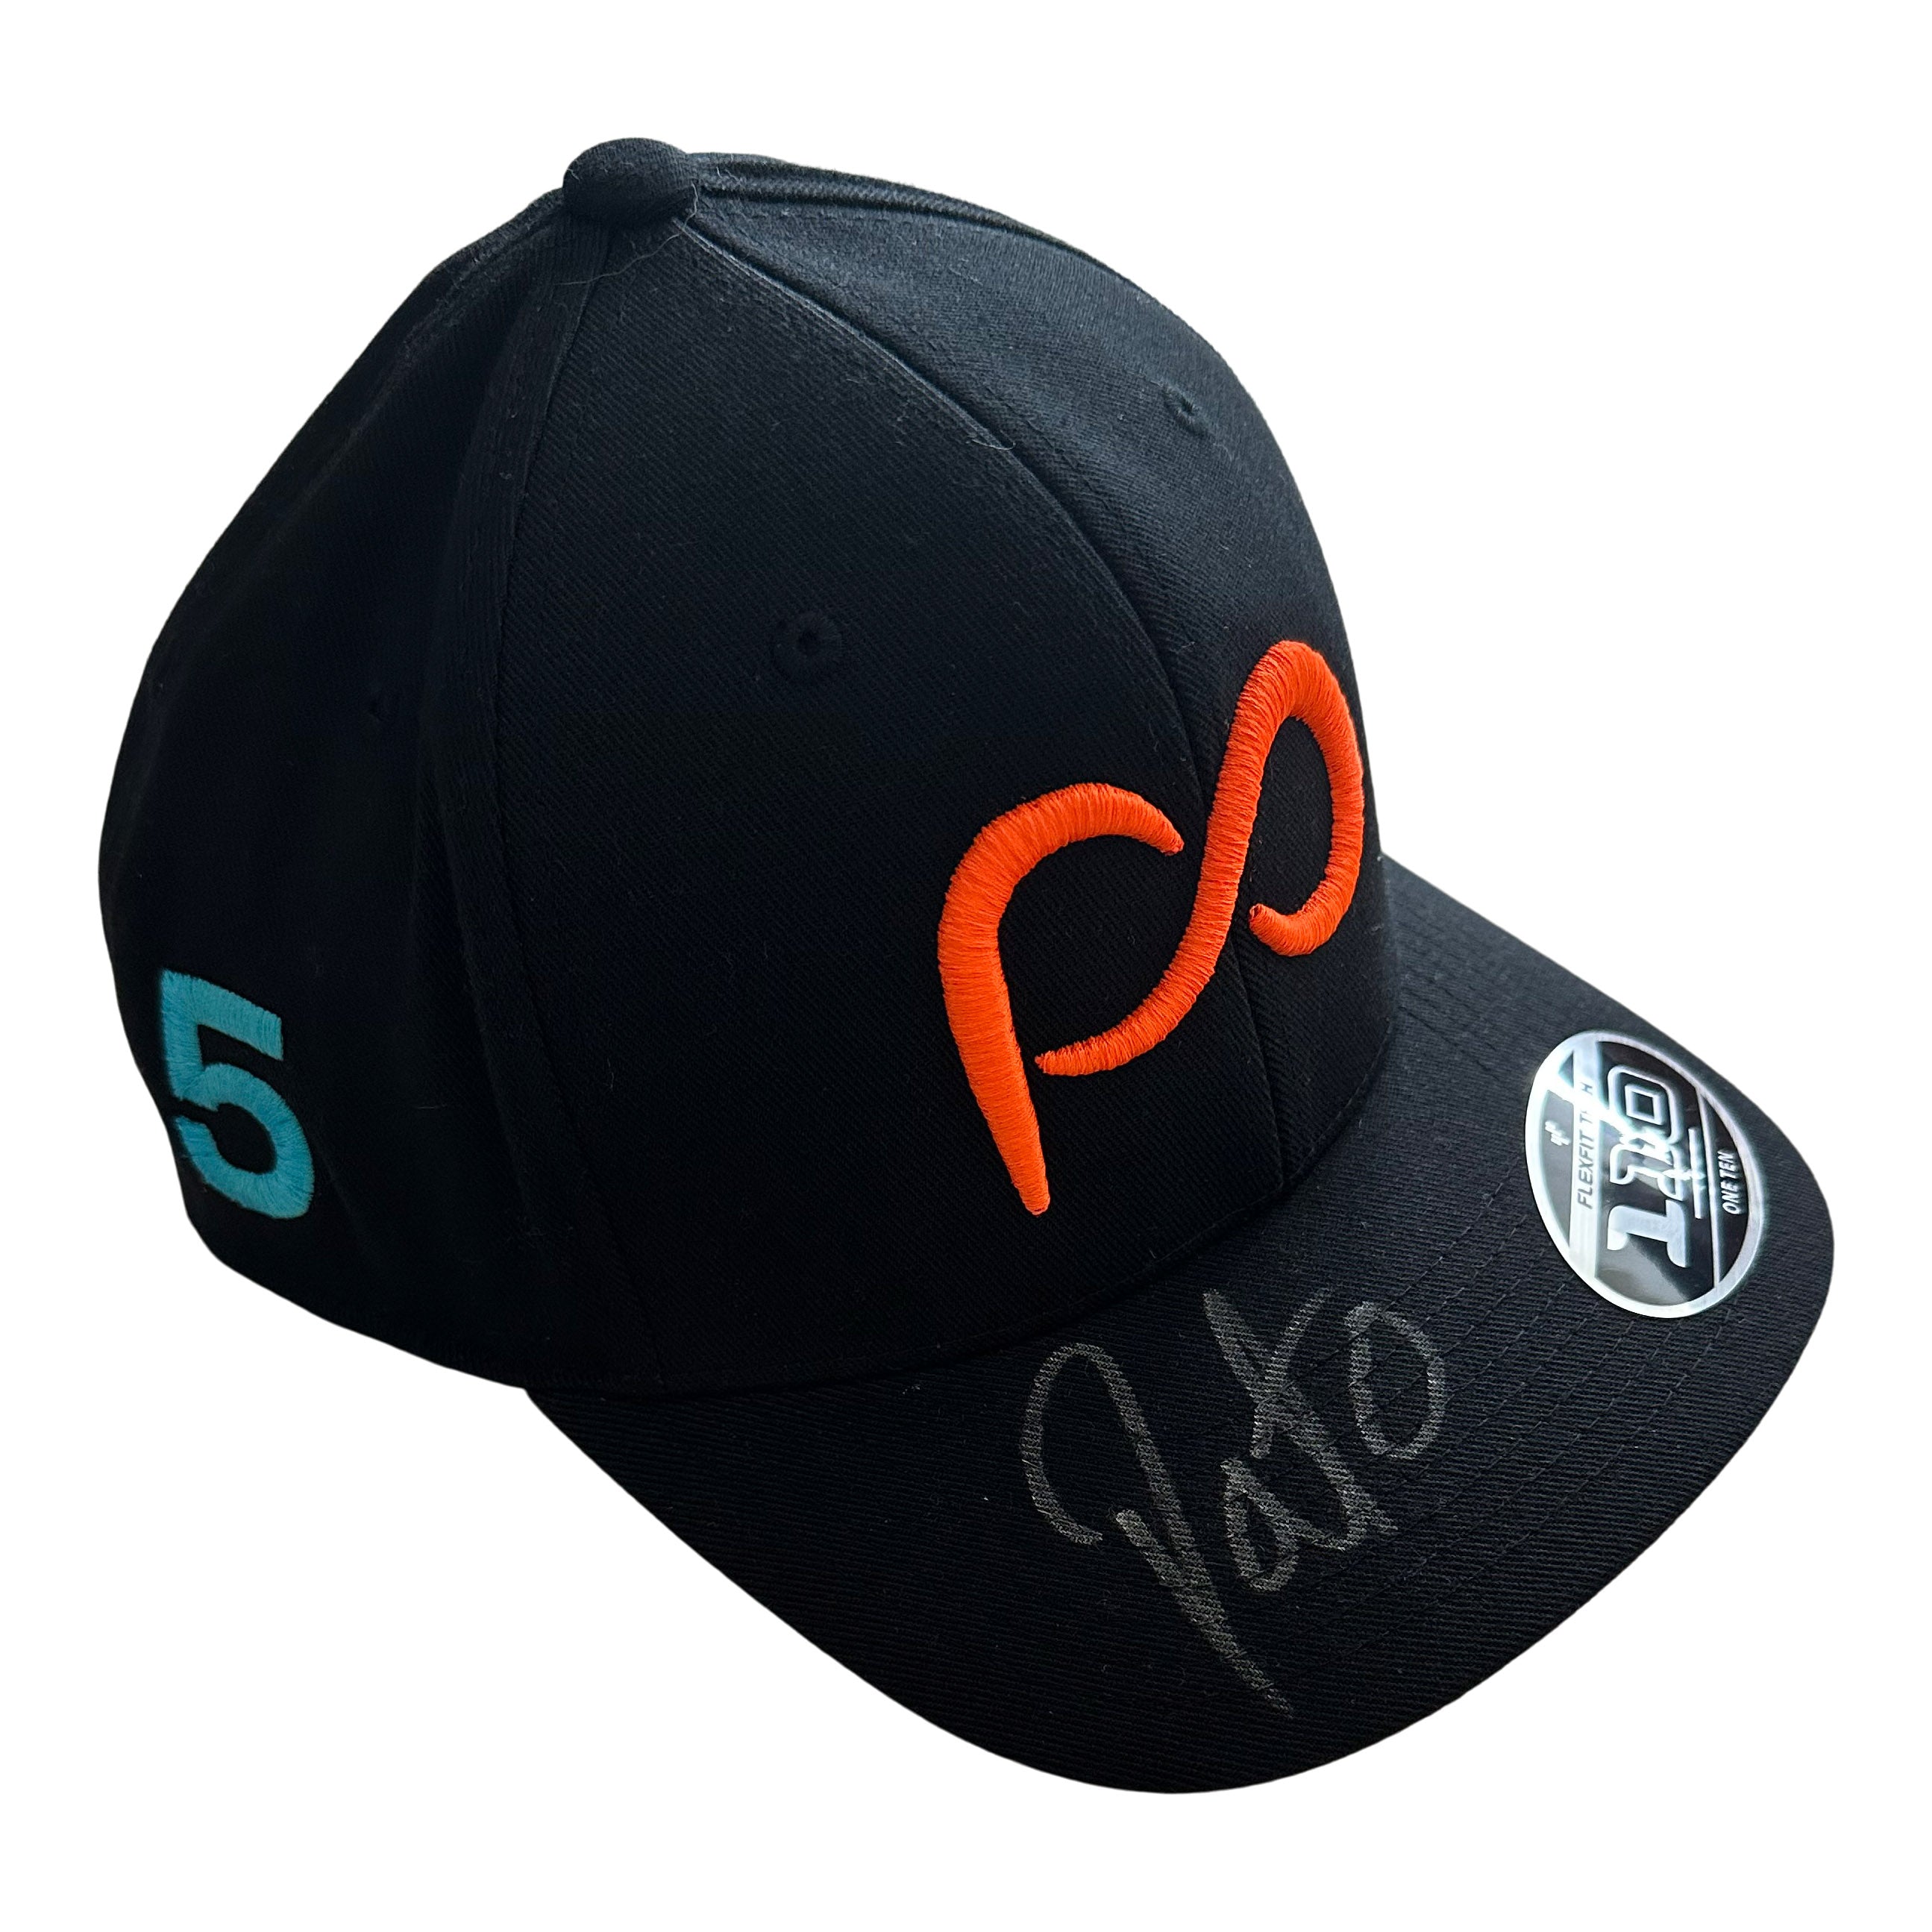 *Autographed* Black Curved Bill Cap with PO Neon 3D logo in front and #5 blue on side